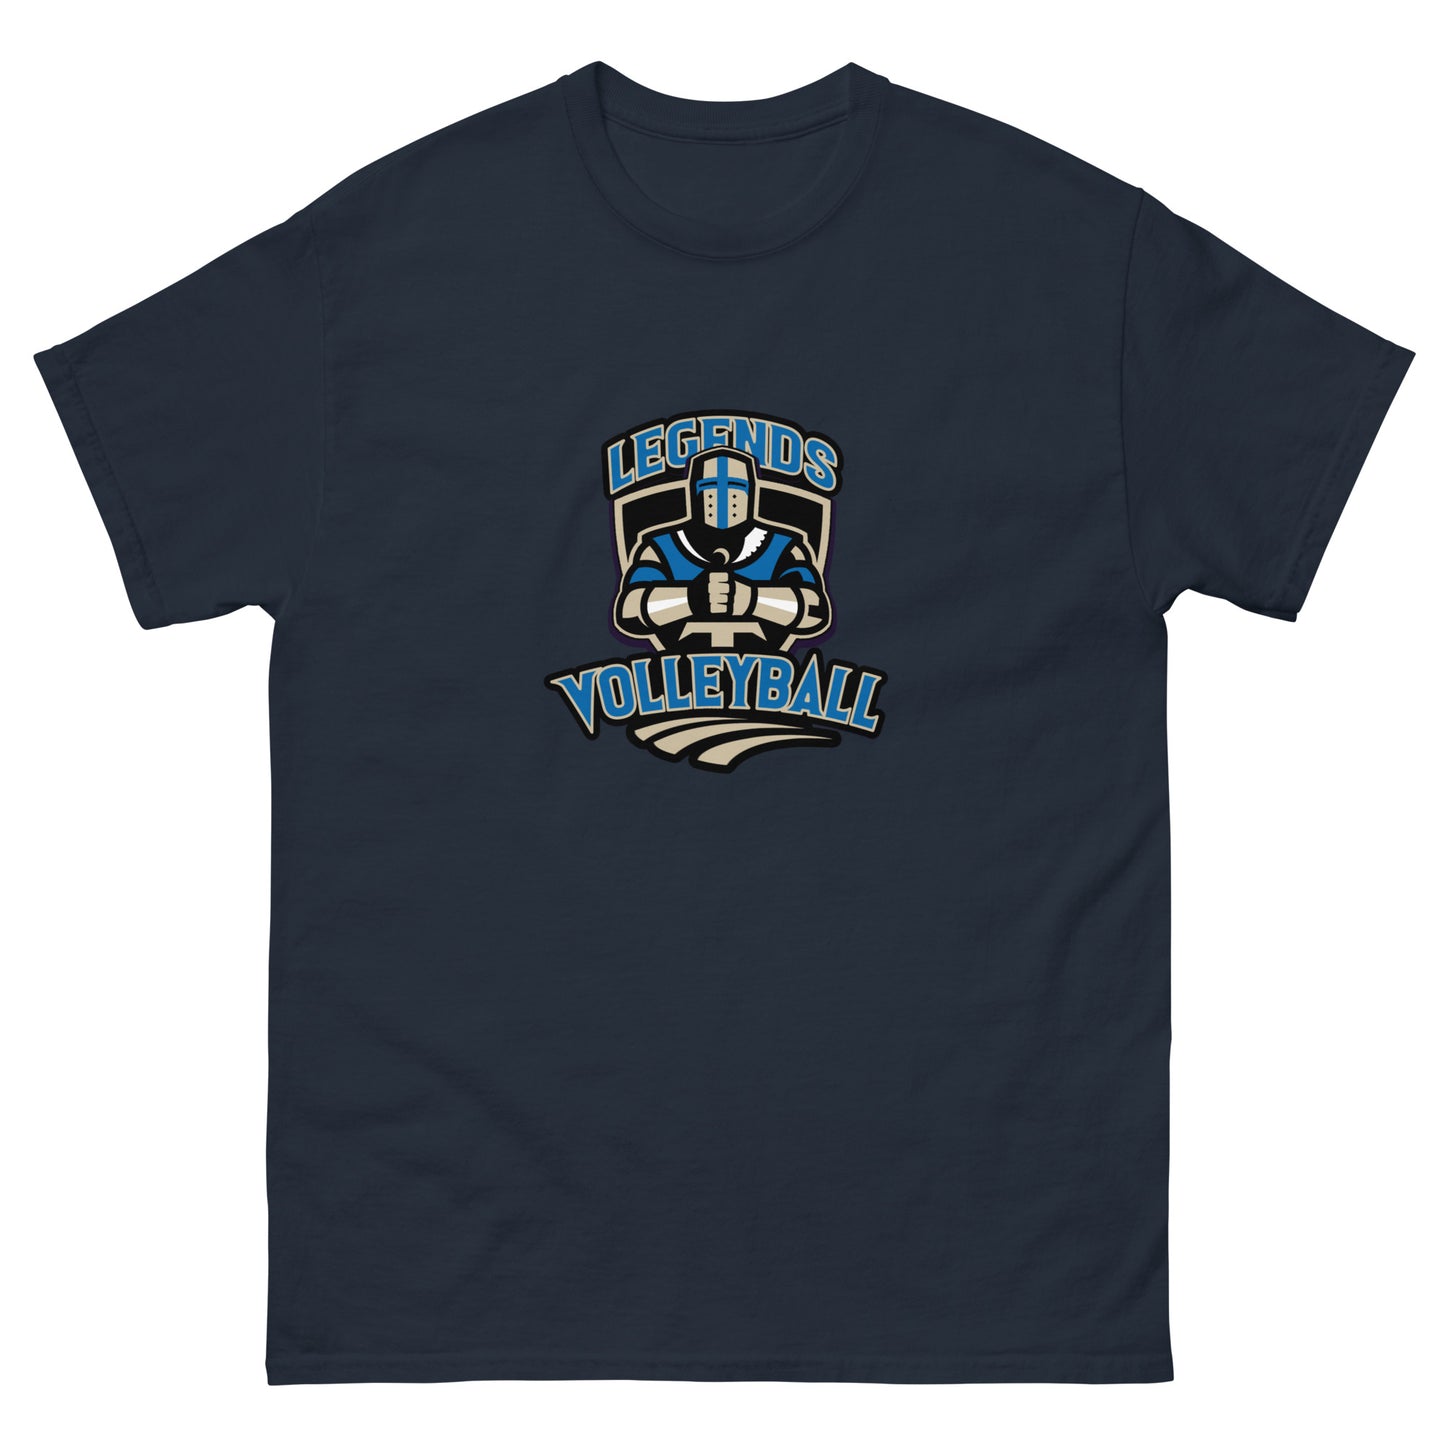 All Saints Volleyball classic tee